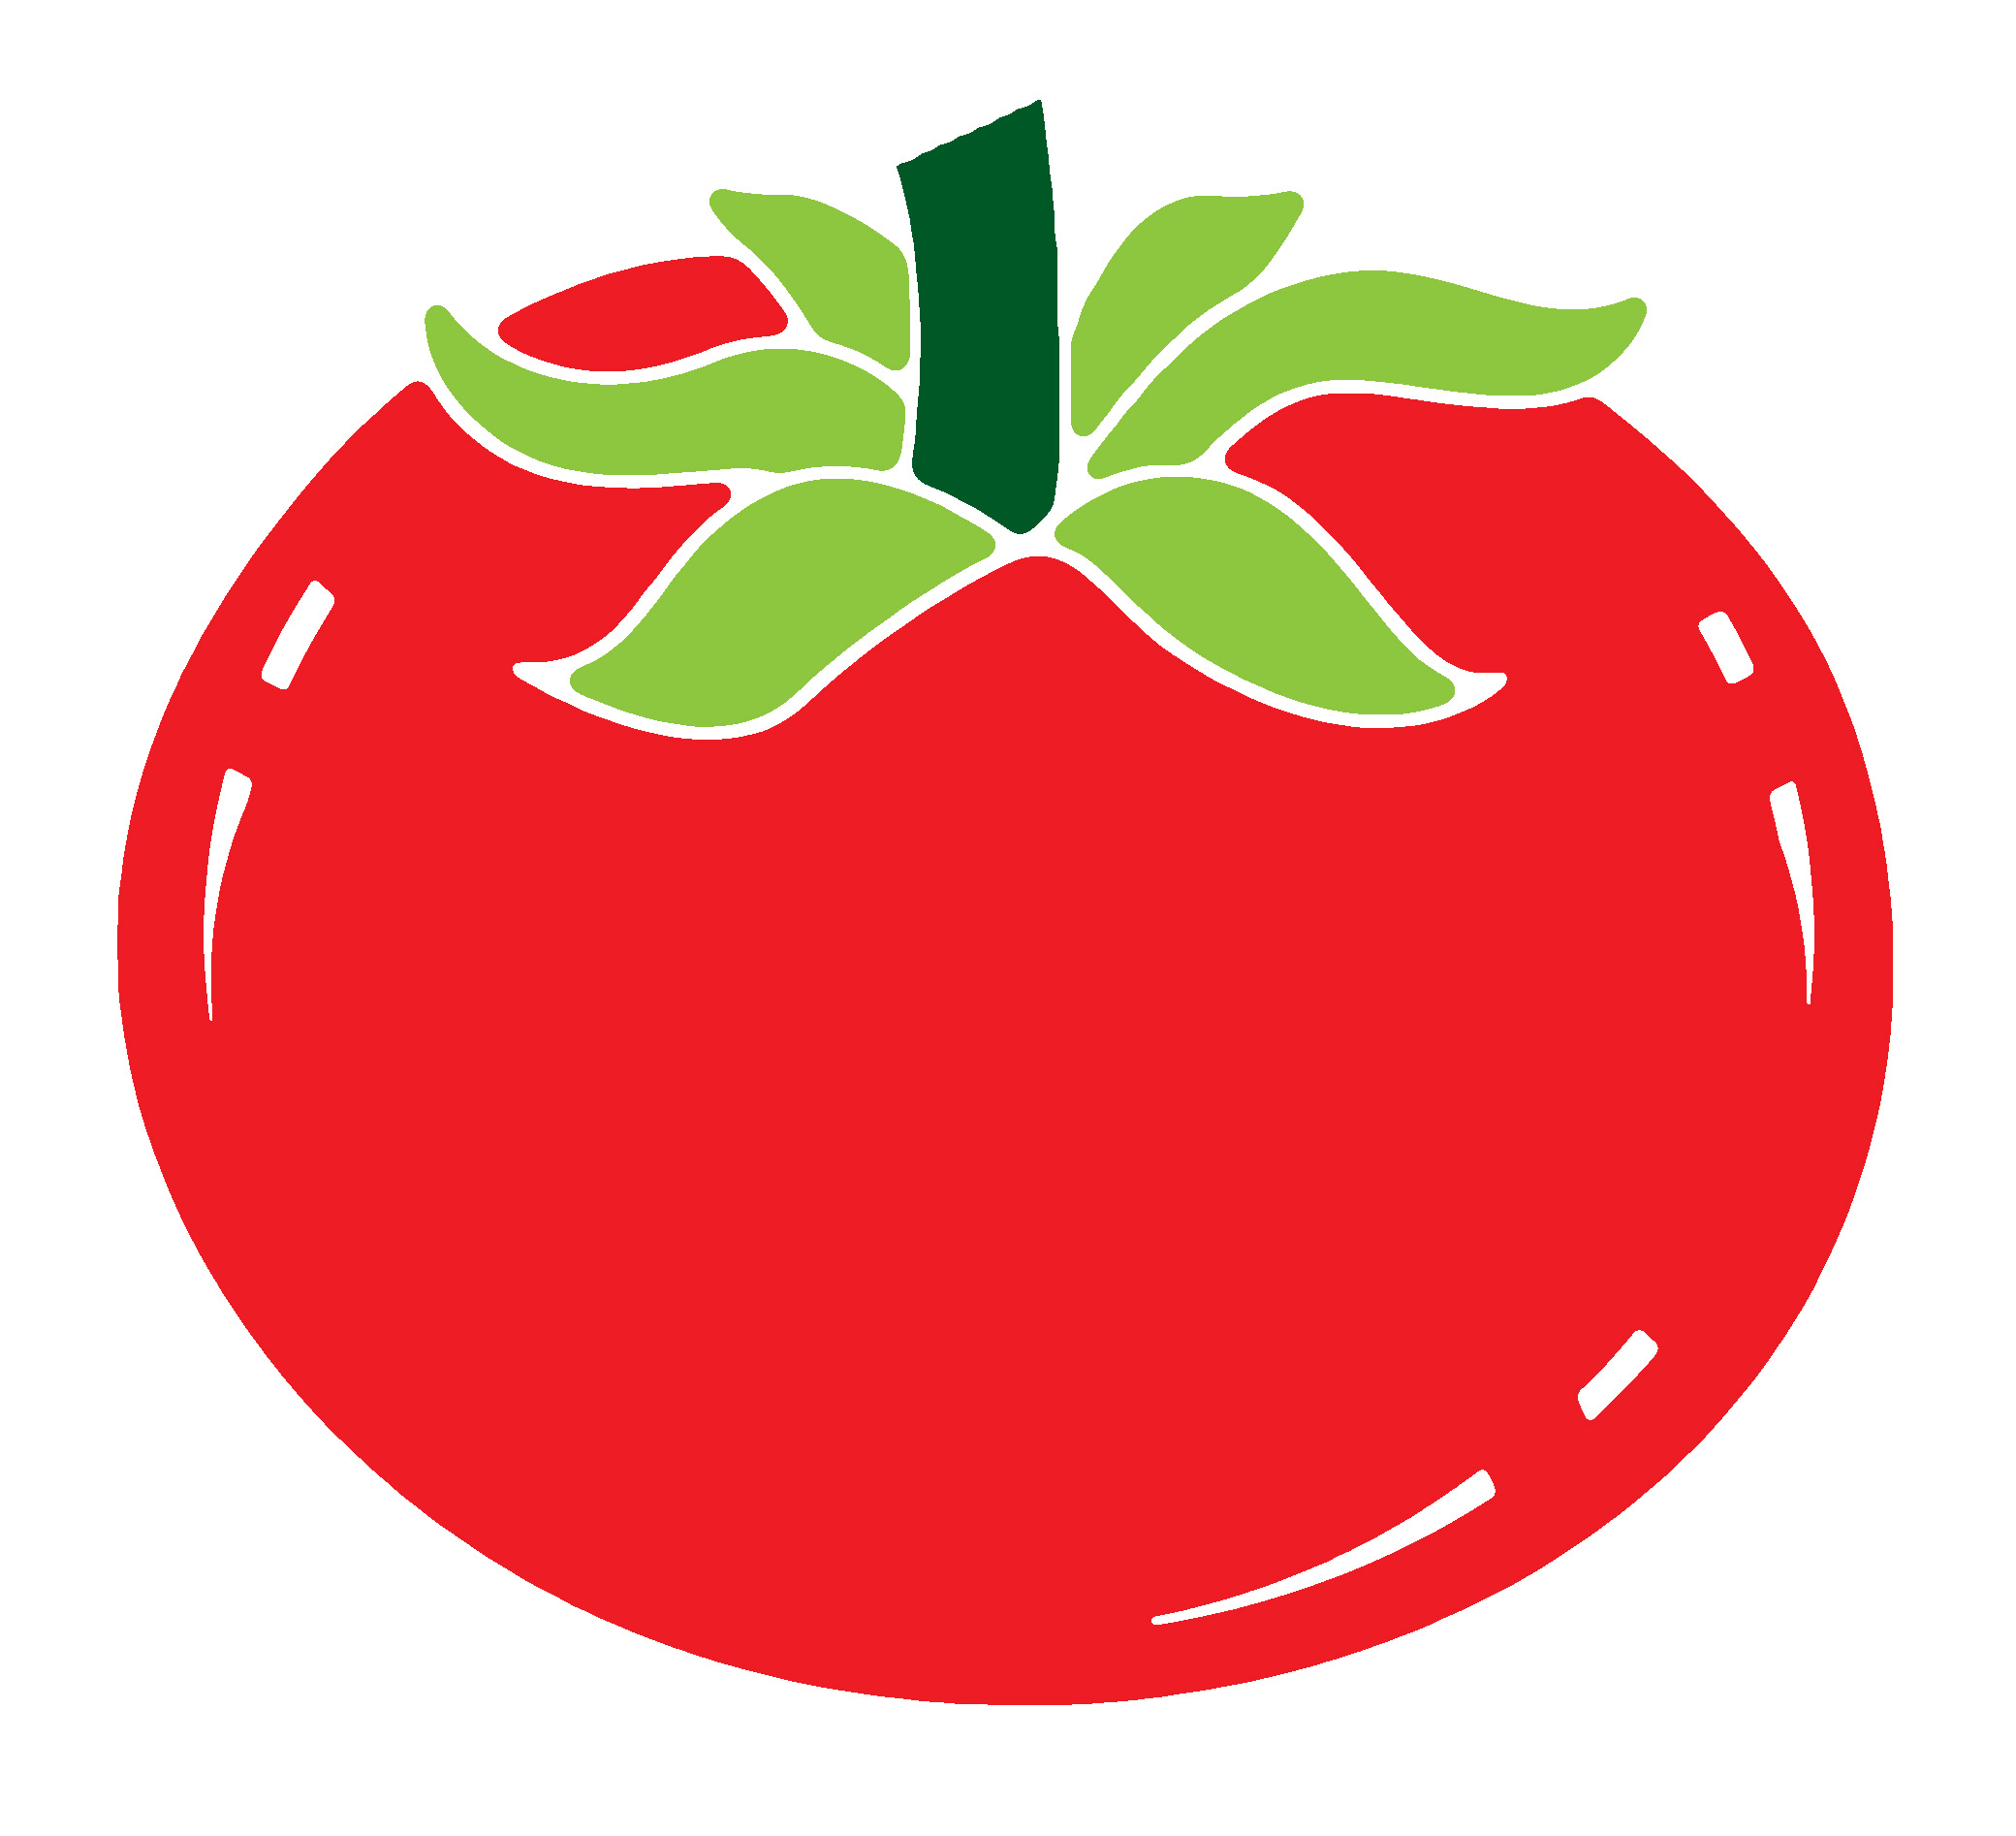 Tomato silhouette clipart drawing